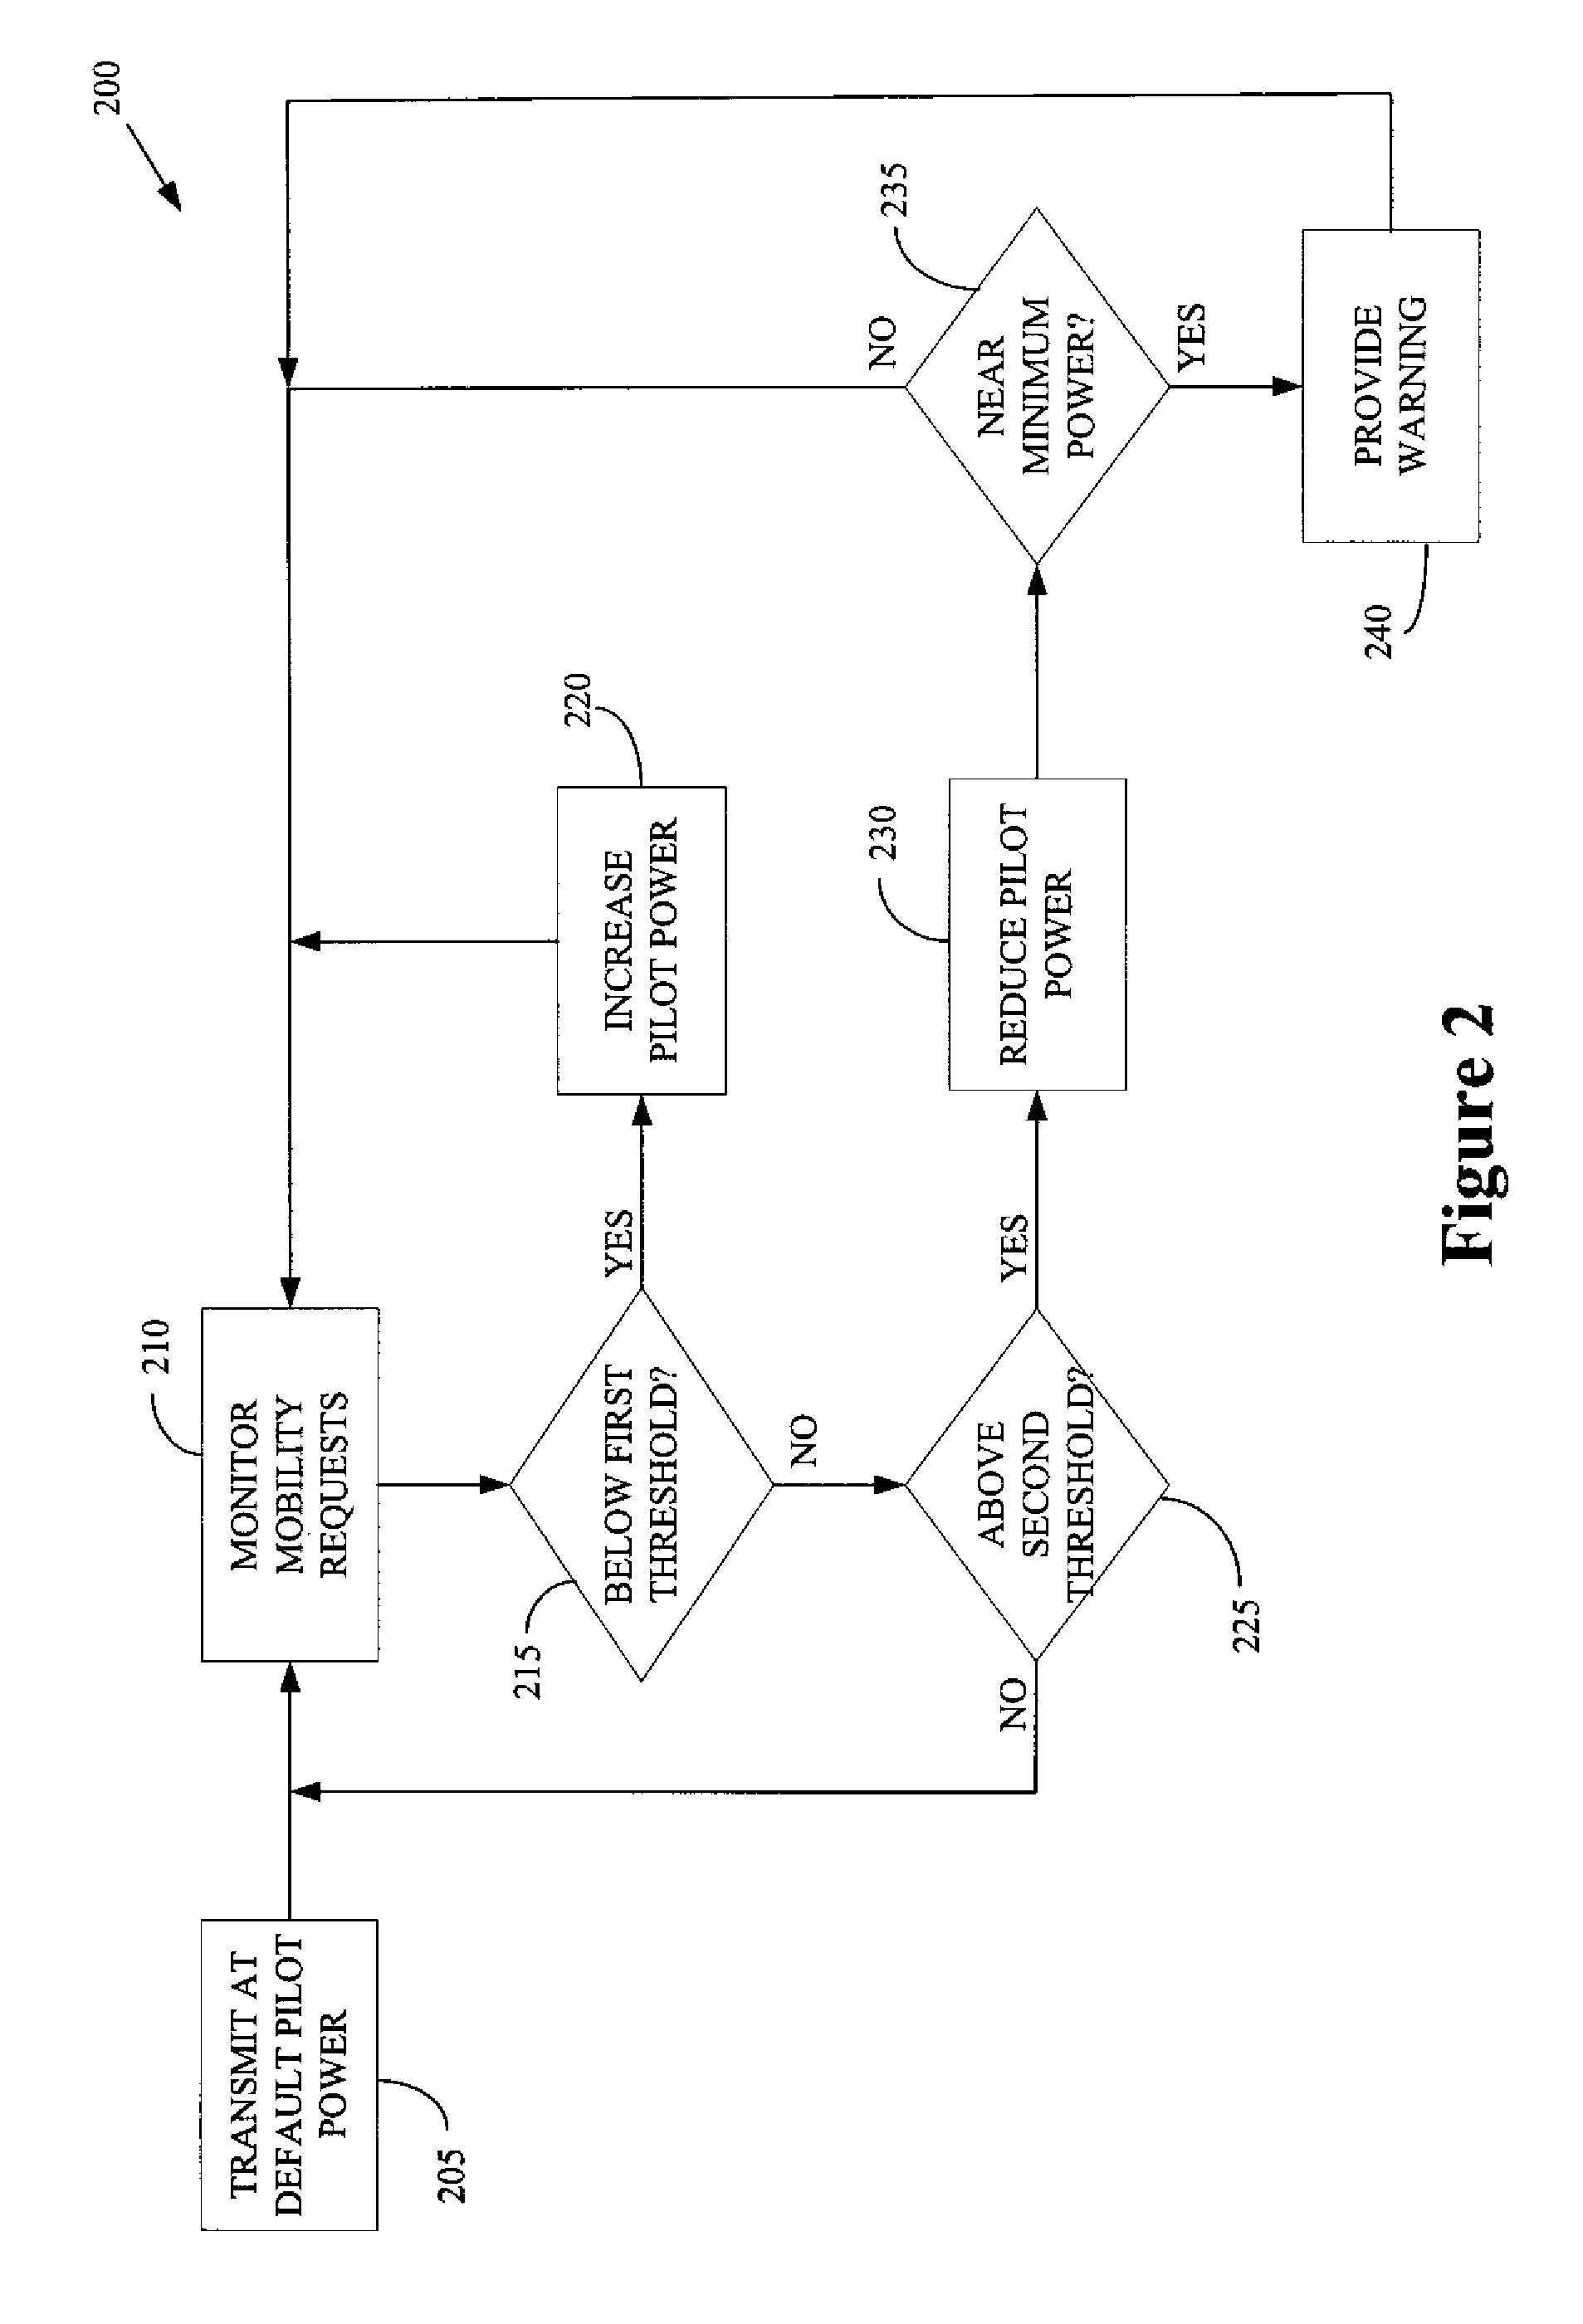 Method of automatically configuring a home base station router